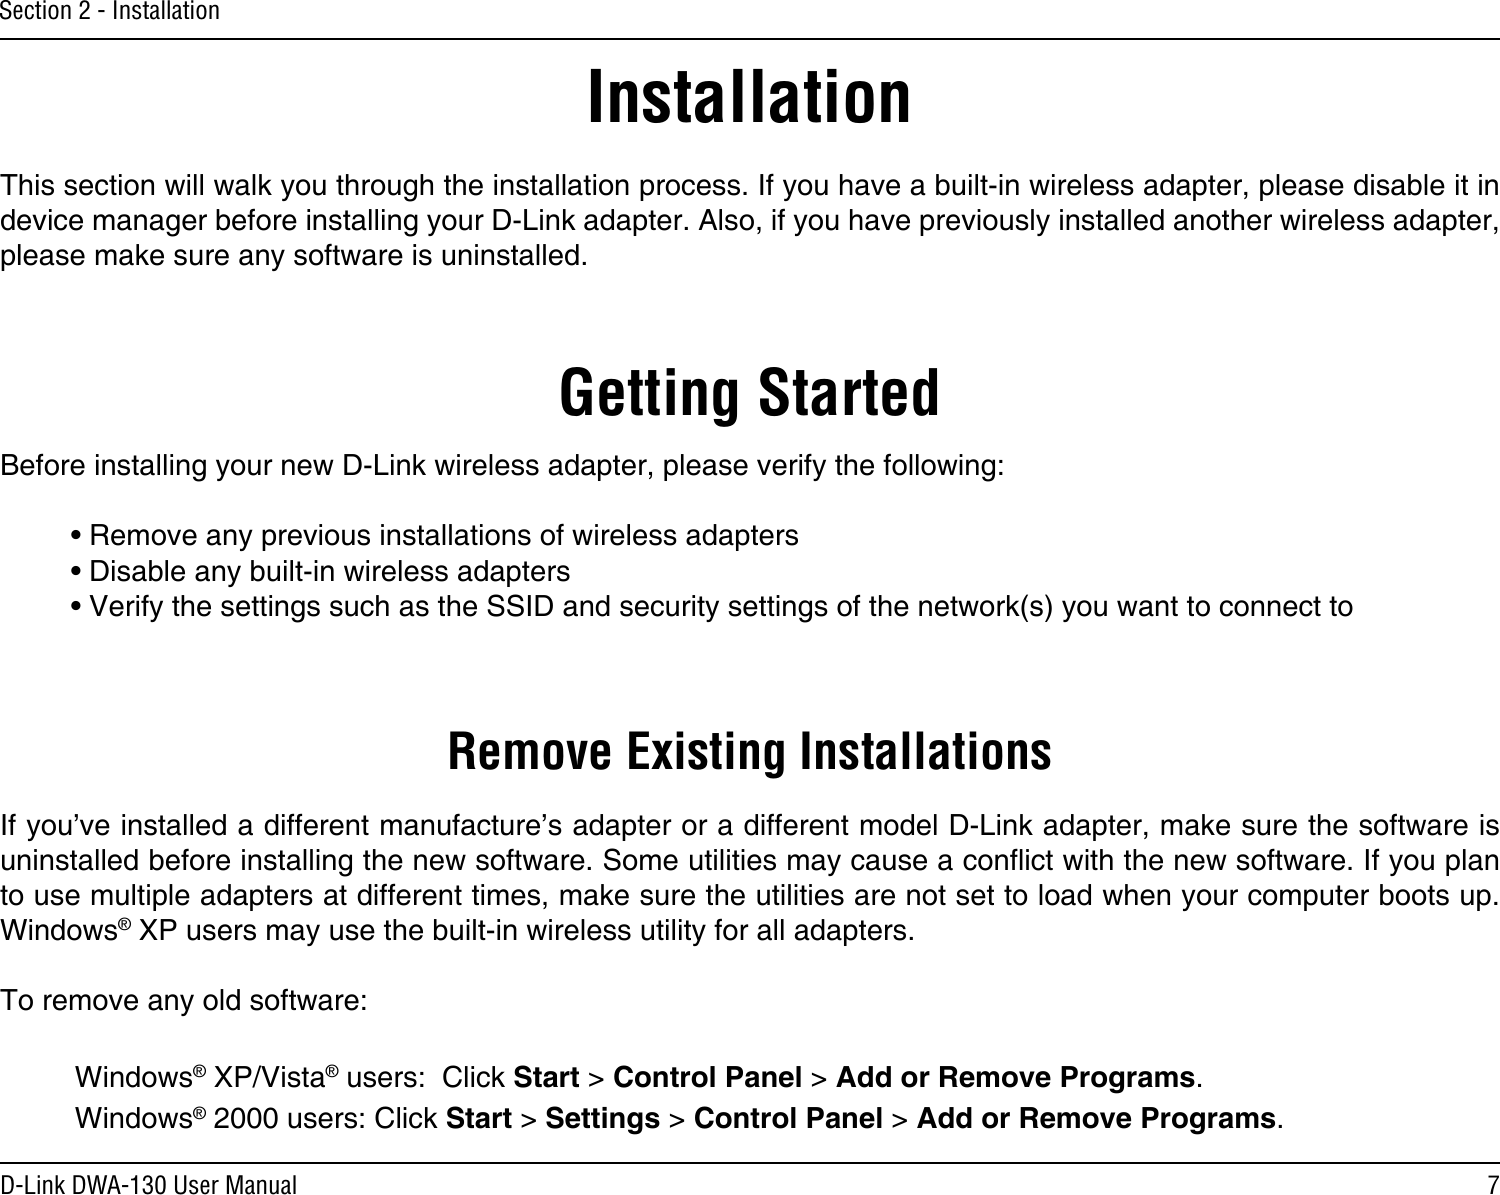 7D-Link DWA-130 User ManualSection 2 - InstallationGetting StartedInstallationThis section will walk you through the installation process. If you have a built-in wireless adapter, please disable it in device manager before installing your D-Link adapter. Also, if you have previously installed another wireless adapter, please make sure any software is uninstalled.Before installing your new D-Link wireless adapter, please verify the following:• Remove any previous installations of wireless adapters• Disable any built-in wireless adapters • Verify the settings such as the SSID and security settings of the network(s) you want to connect toRemove Existing InstallationsIf you’ve installed a different manufacture’s adapter or a different model D-Link adapter, make sure the software is uninstalled before installing the new software. Some utilities may cause a conict with the new software. If you plan to use multiple adapters at different times, make sure the utilities are not set to load when your computer boots up. Windows® XP users may use the built-in wireless utility for all adapters.To remove any old software:  Windows® XP/Vista® users:  Click Start &gt; Control Panel &gt; Add or Remove Programs.   Windows® 2000 users: Click Start &gt; Settings &gt; Control Panel &gt; Add or Remove Programs.